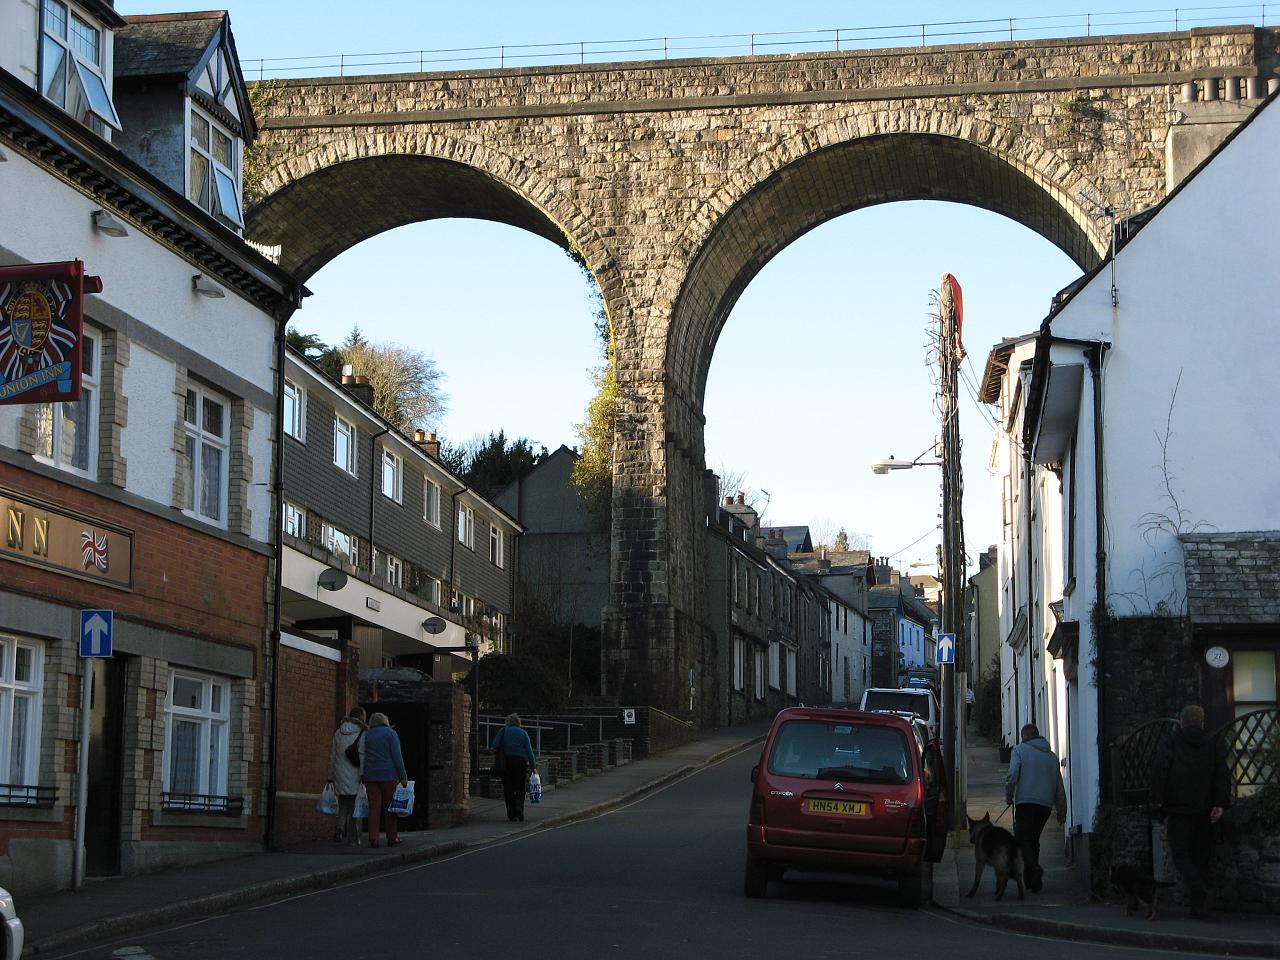 Tavistock by Phil Beard /></a><br>

©Phil Beard: An eight arch viaduct crossed the town. It carried the railway that connected Plymouth with Exeter and Waterloo. Construction was completed in 1889 and the track was in use from 1890 to 1968. (<A HREF=